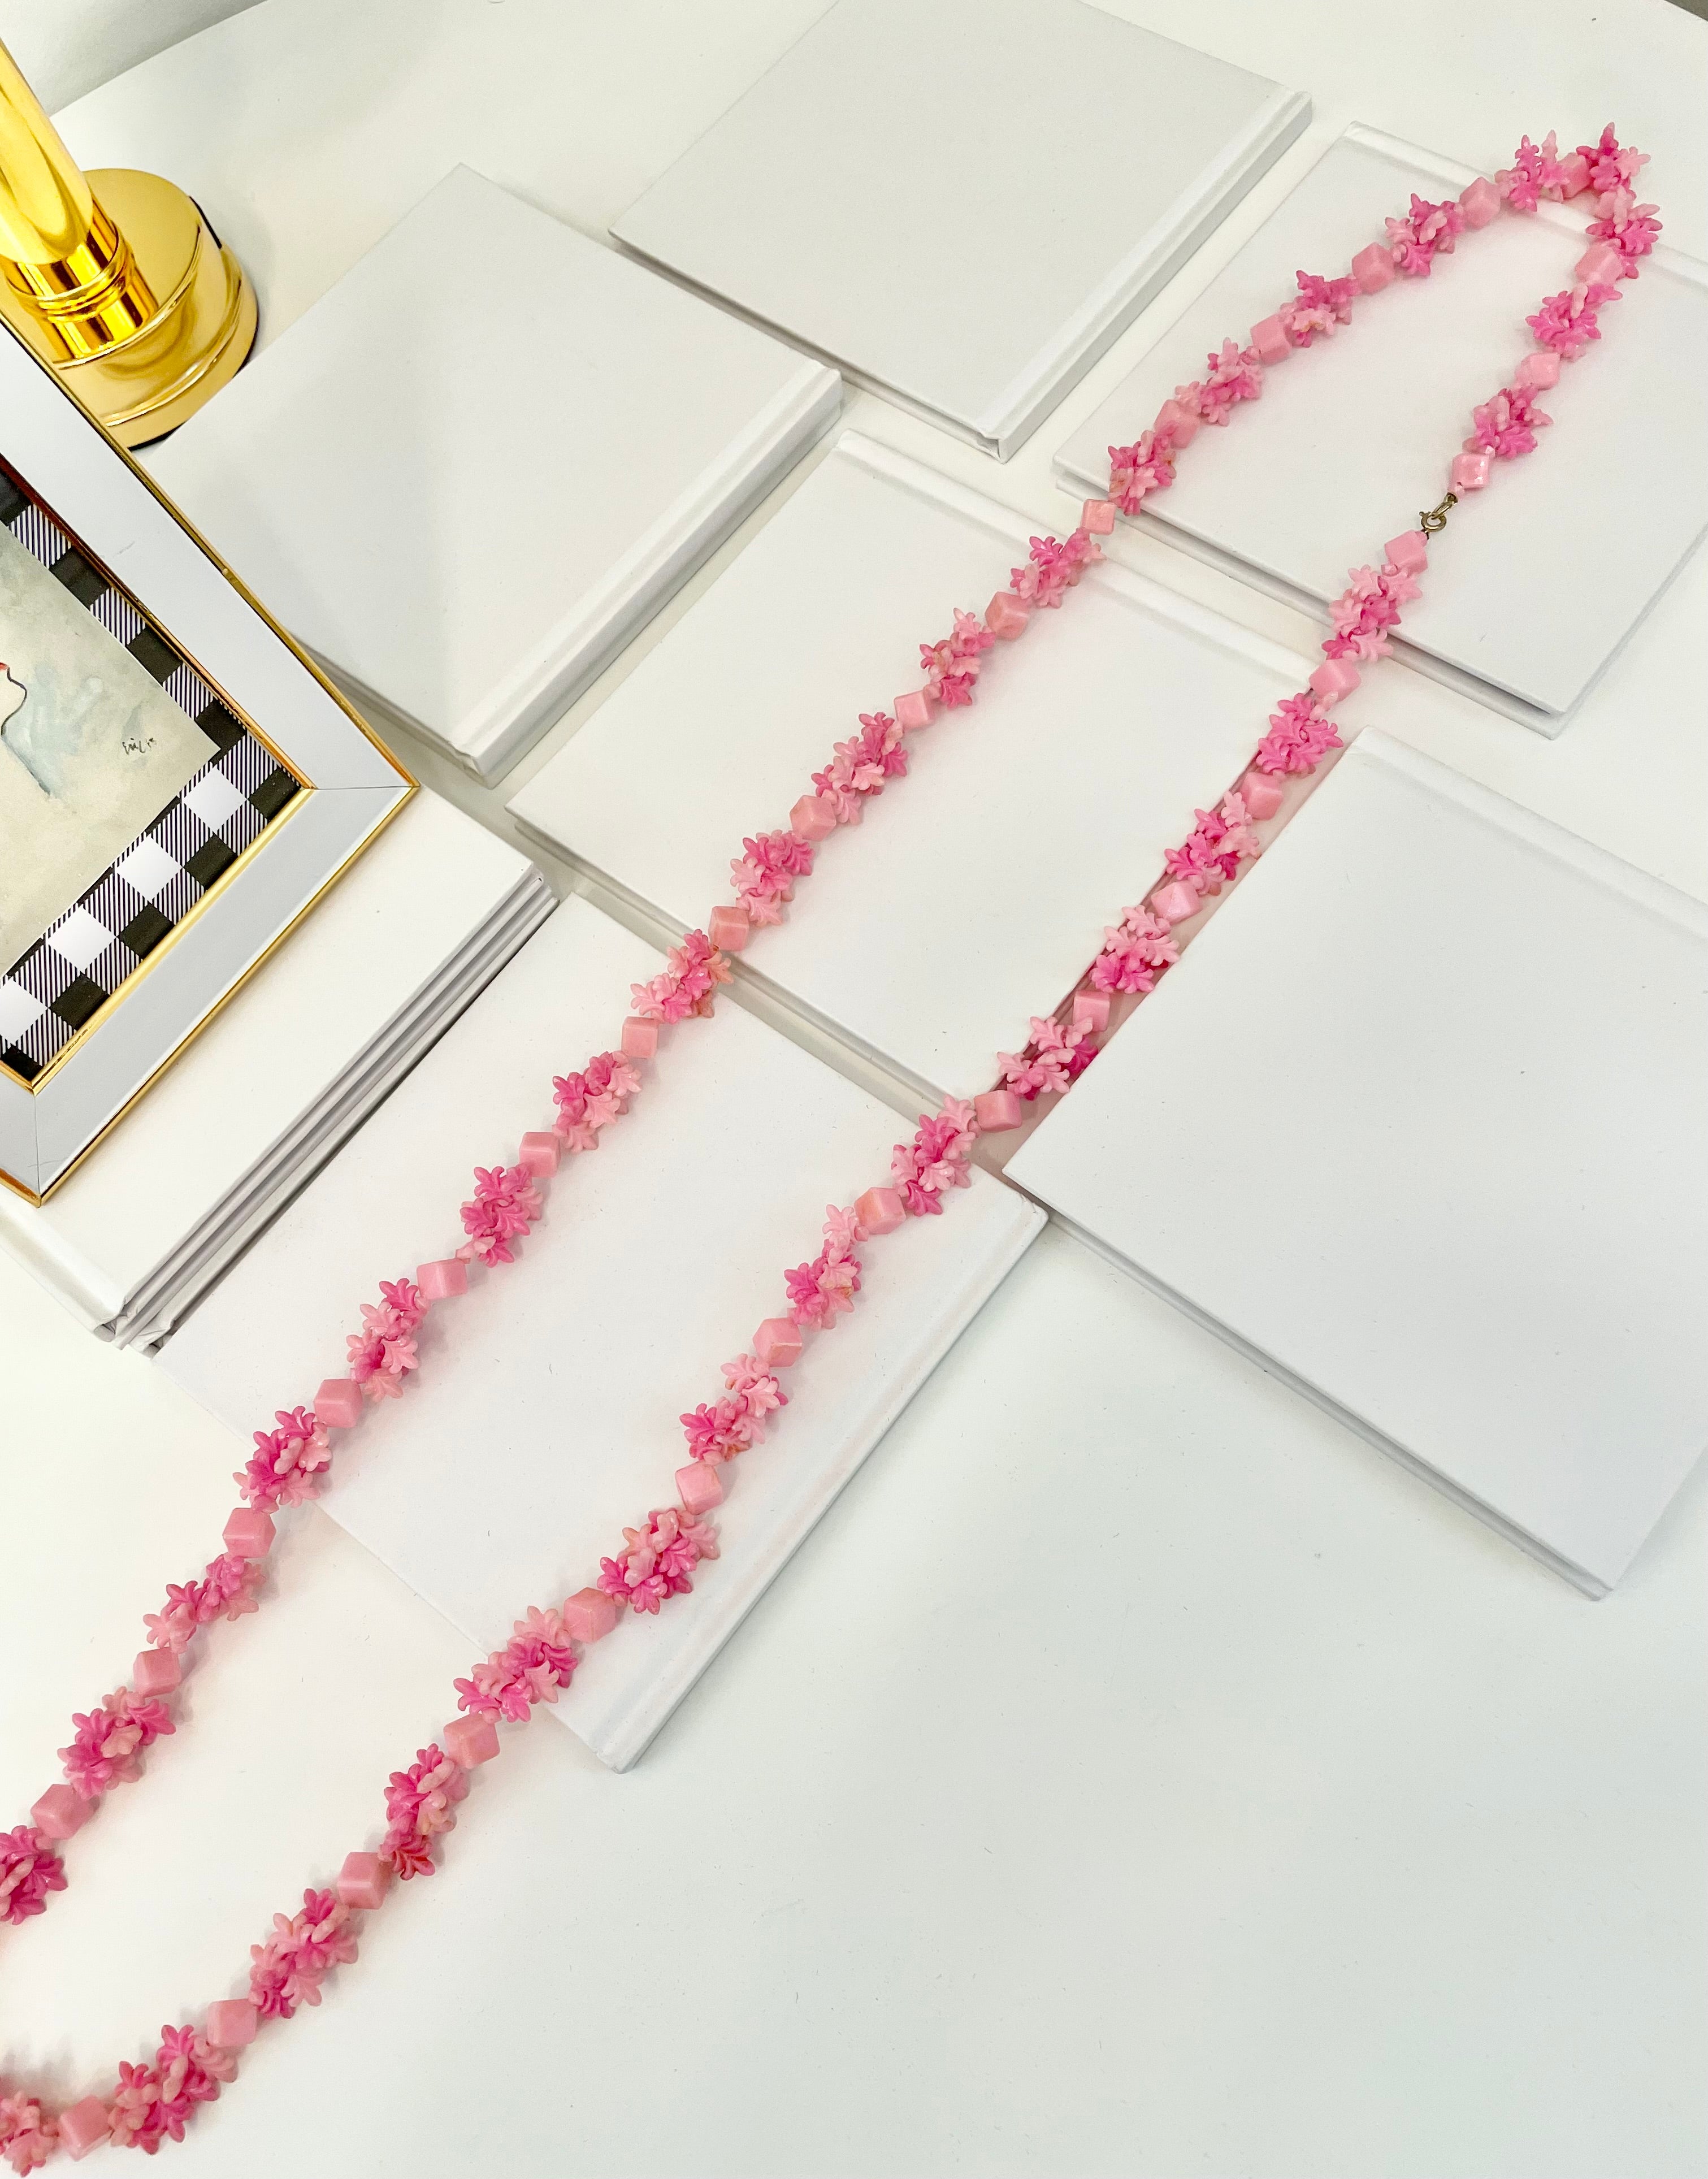 The Flirty Gal adores anything pink. This fun colorful necklace is truly delightful! So preppy.